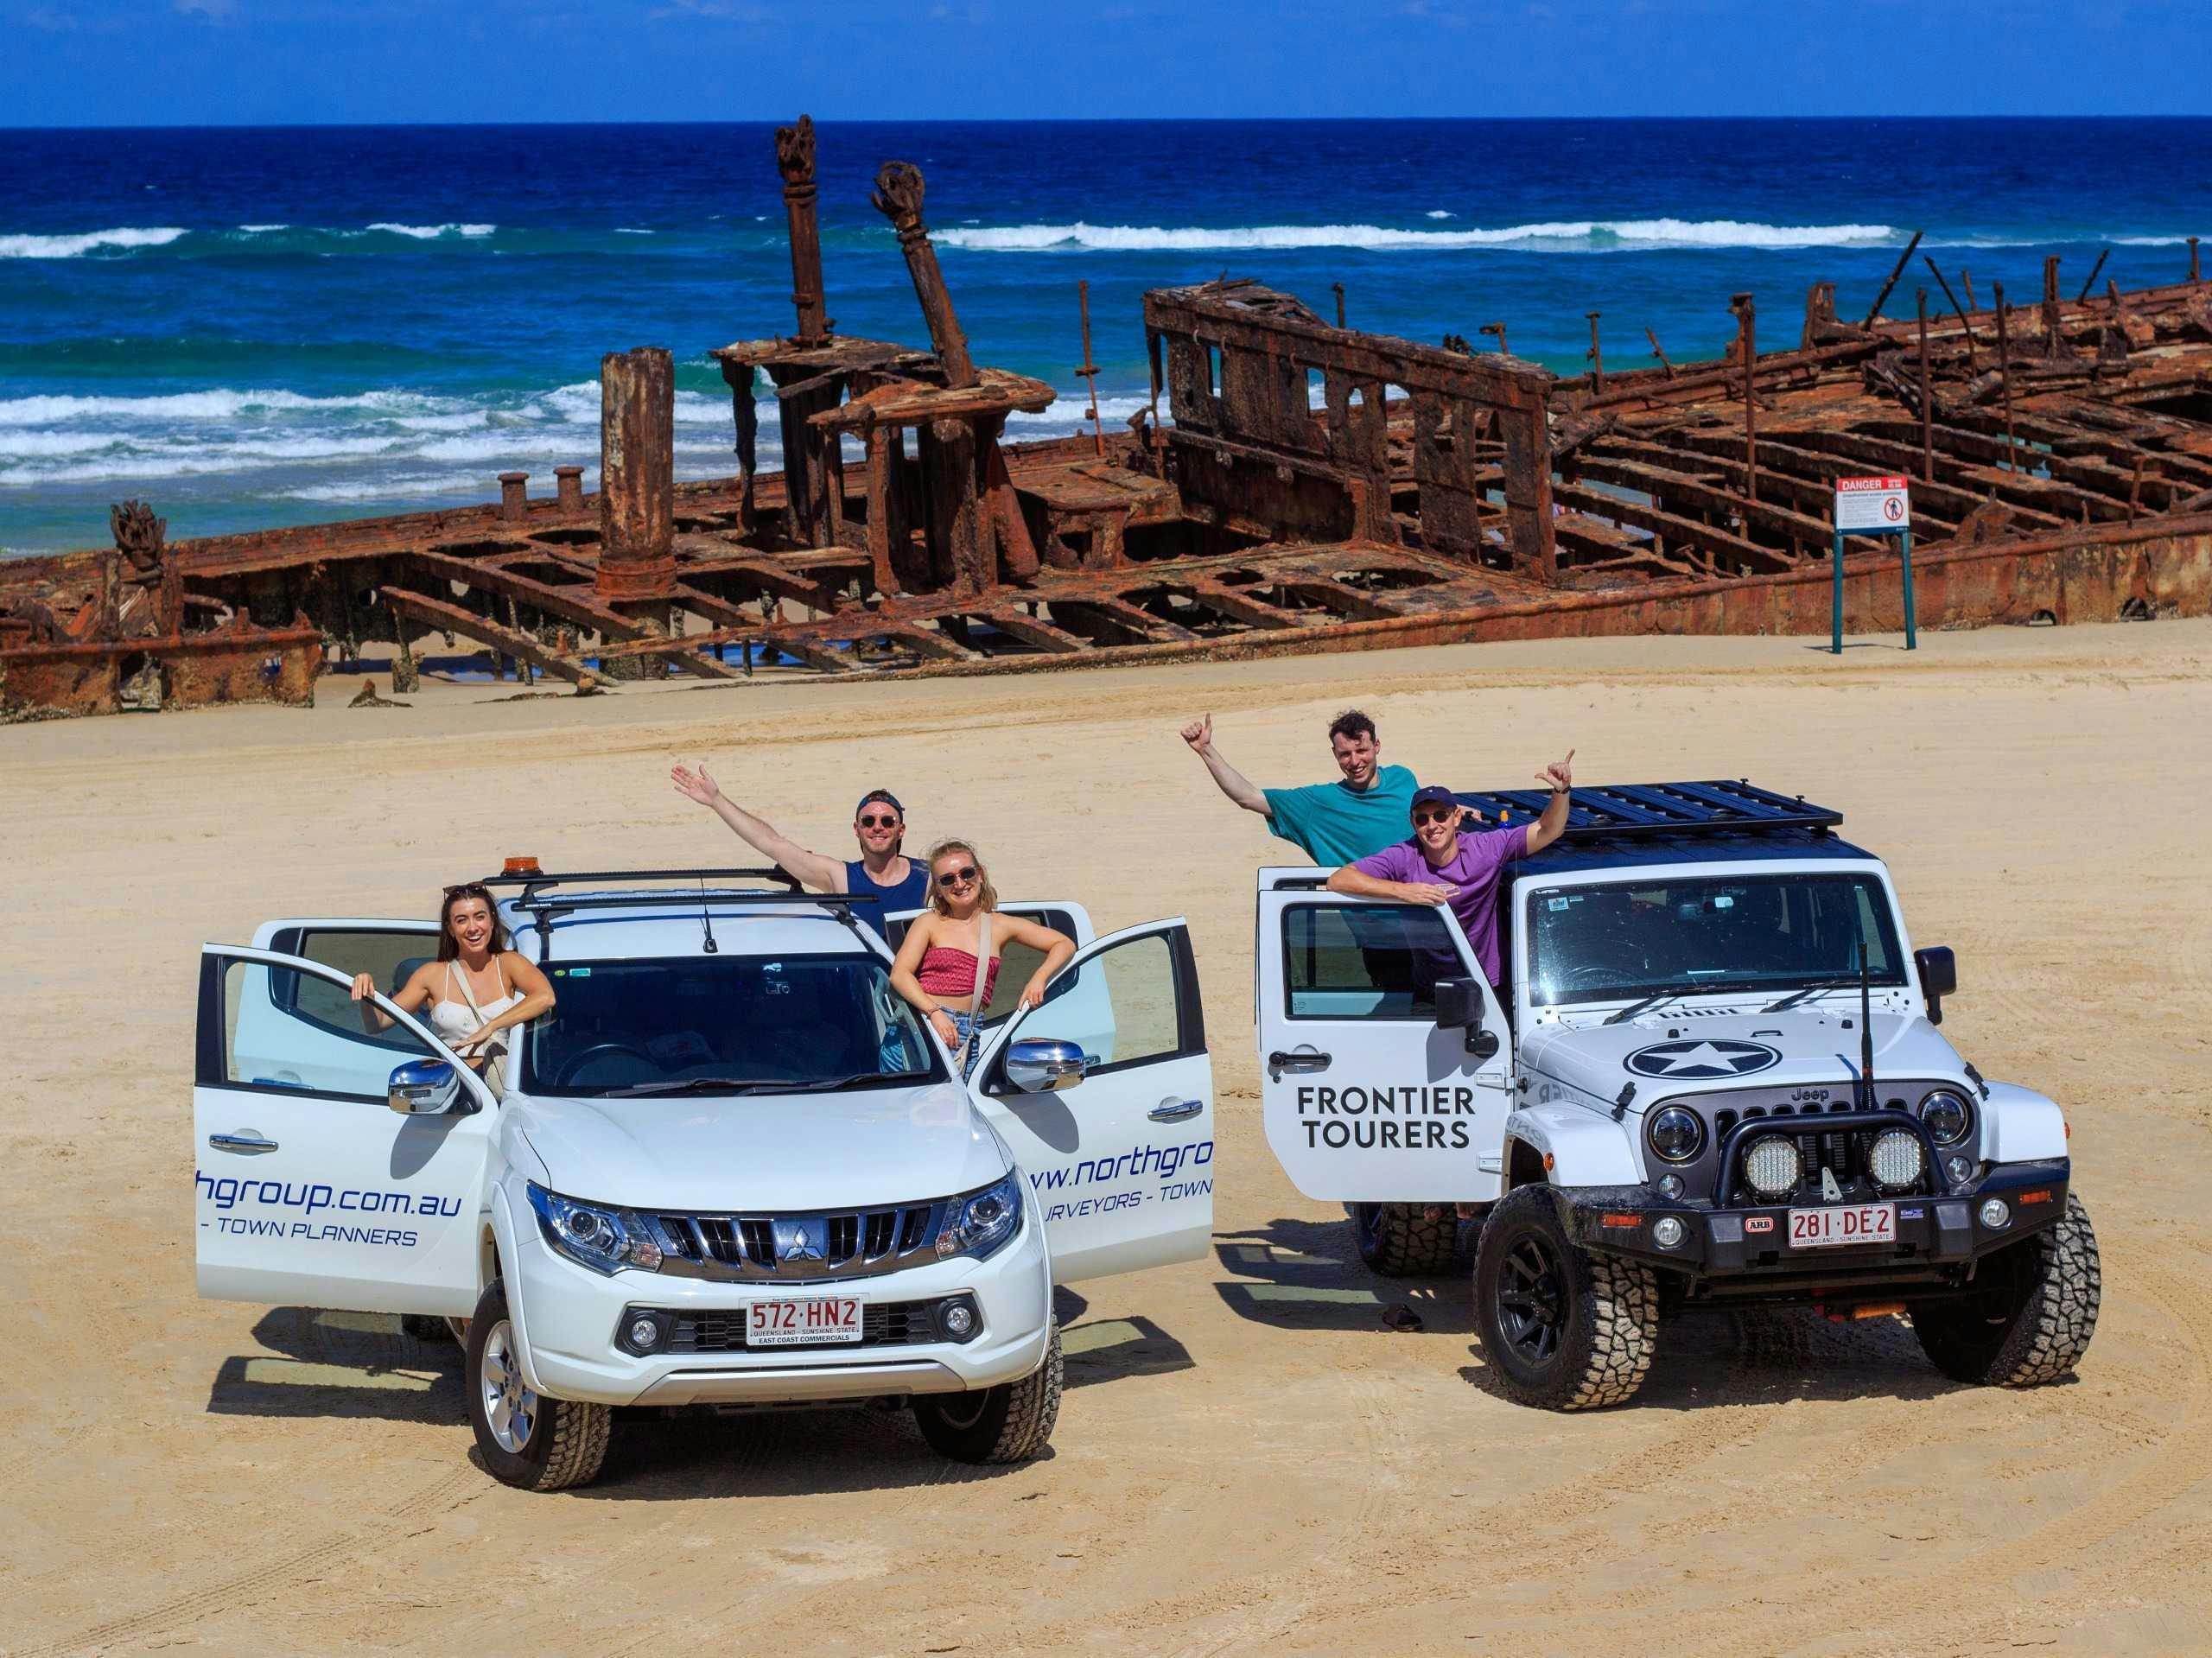 Andrew and his friends driving on the sand in Fraser Island